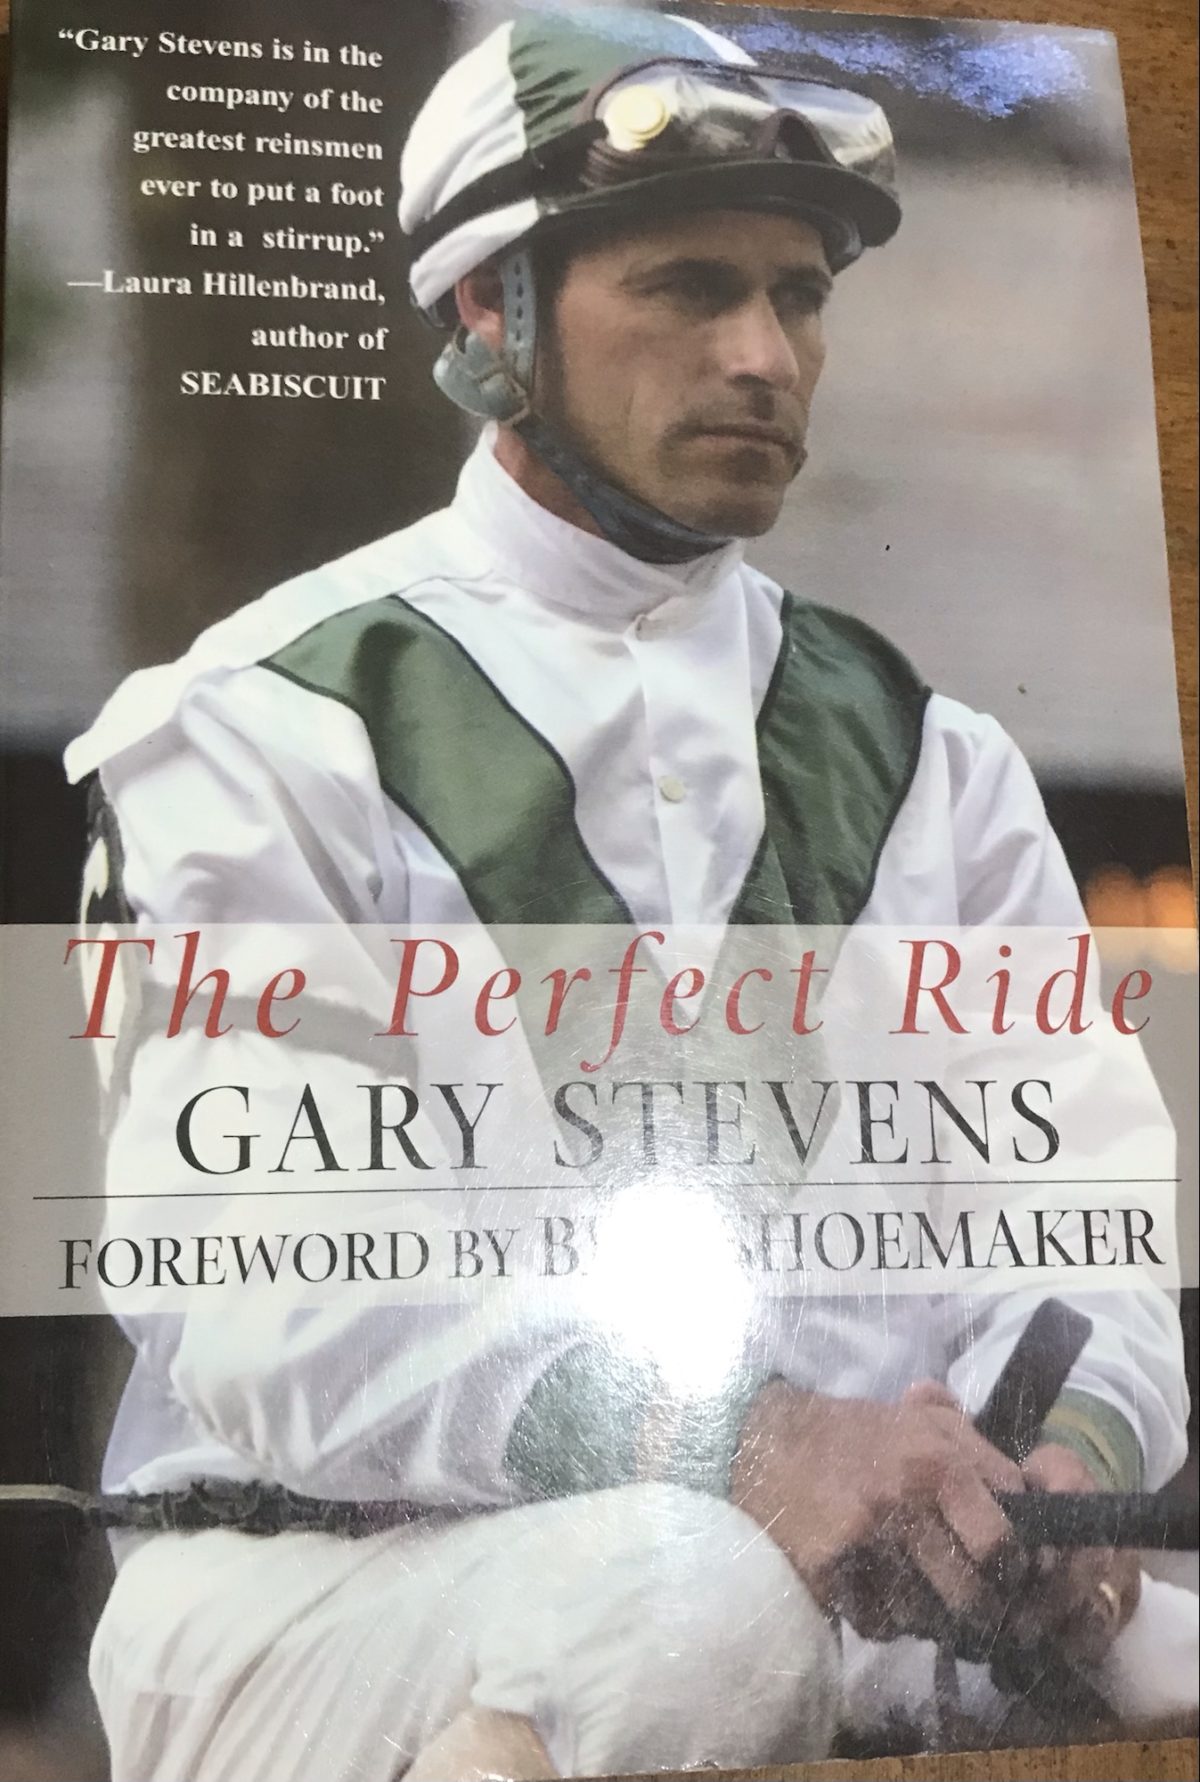 The Perfect Ride by Gary Stevens